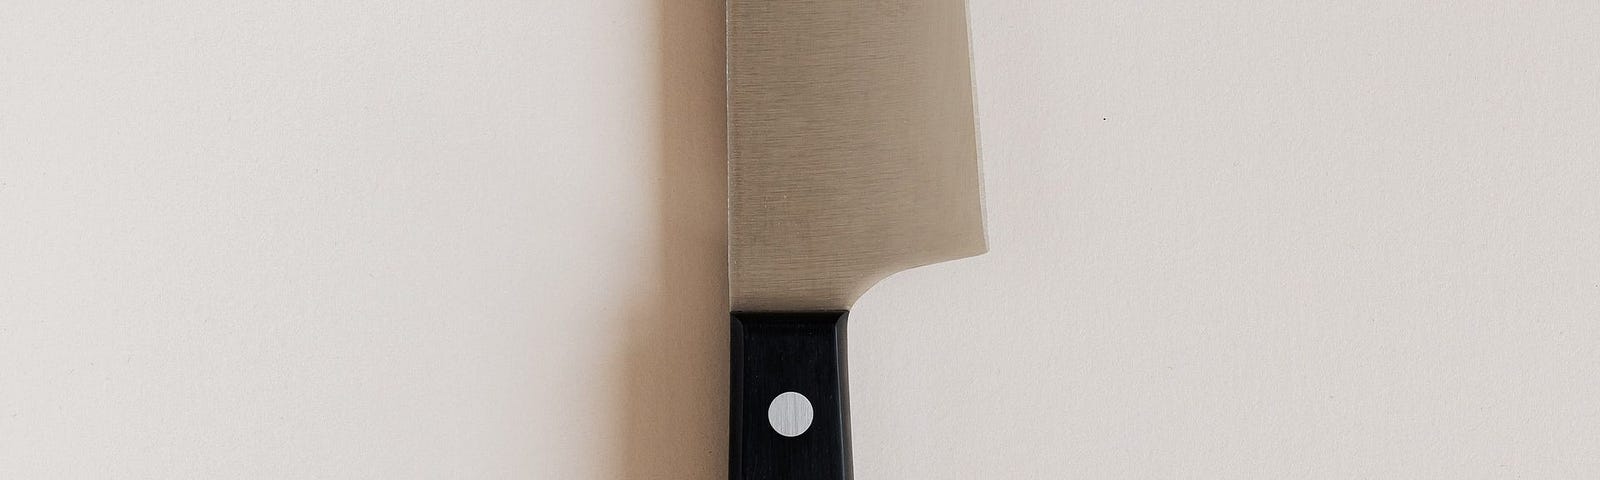 Photo of a meat knife